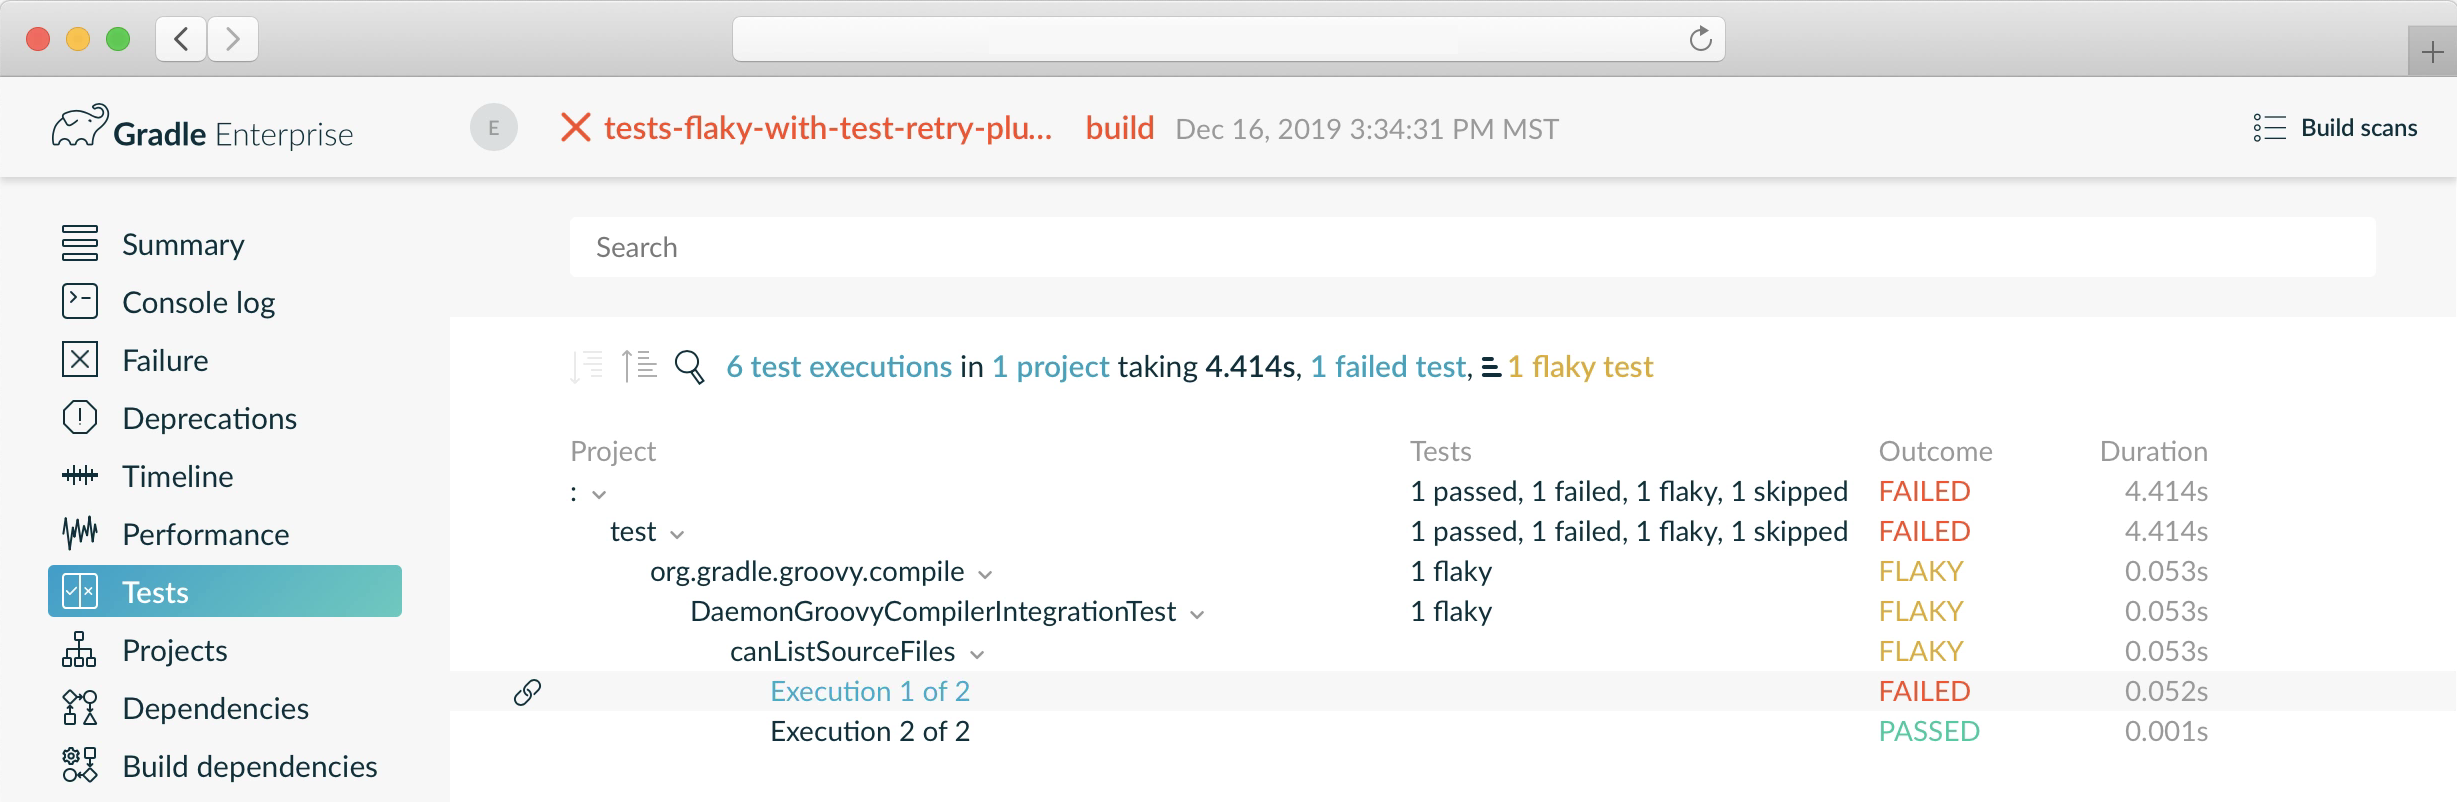 Build scan with flaky tests